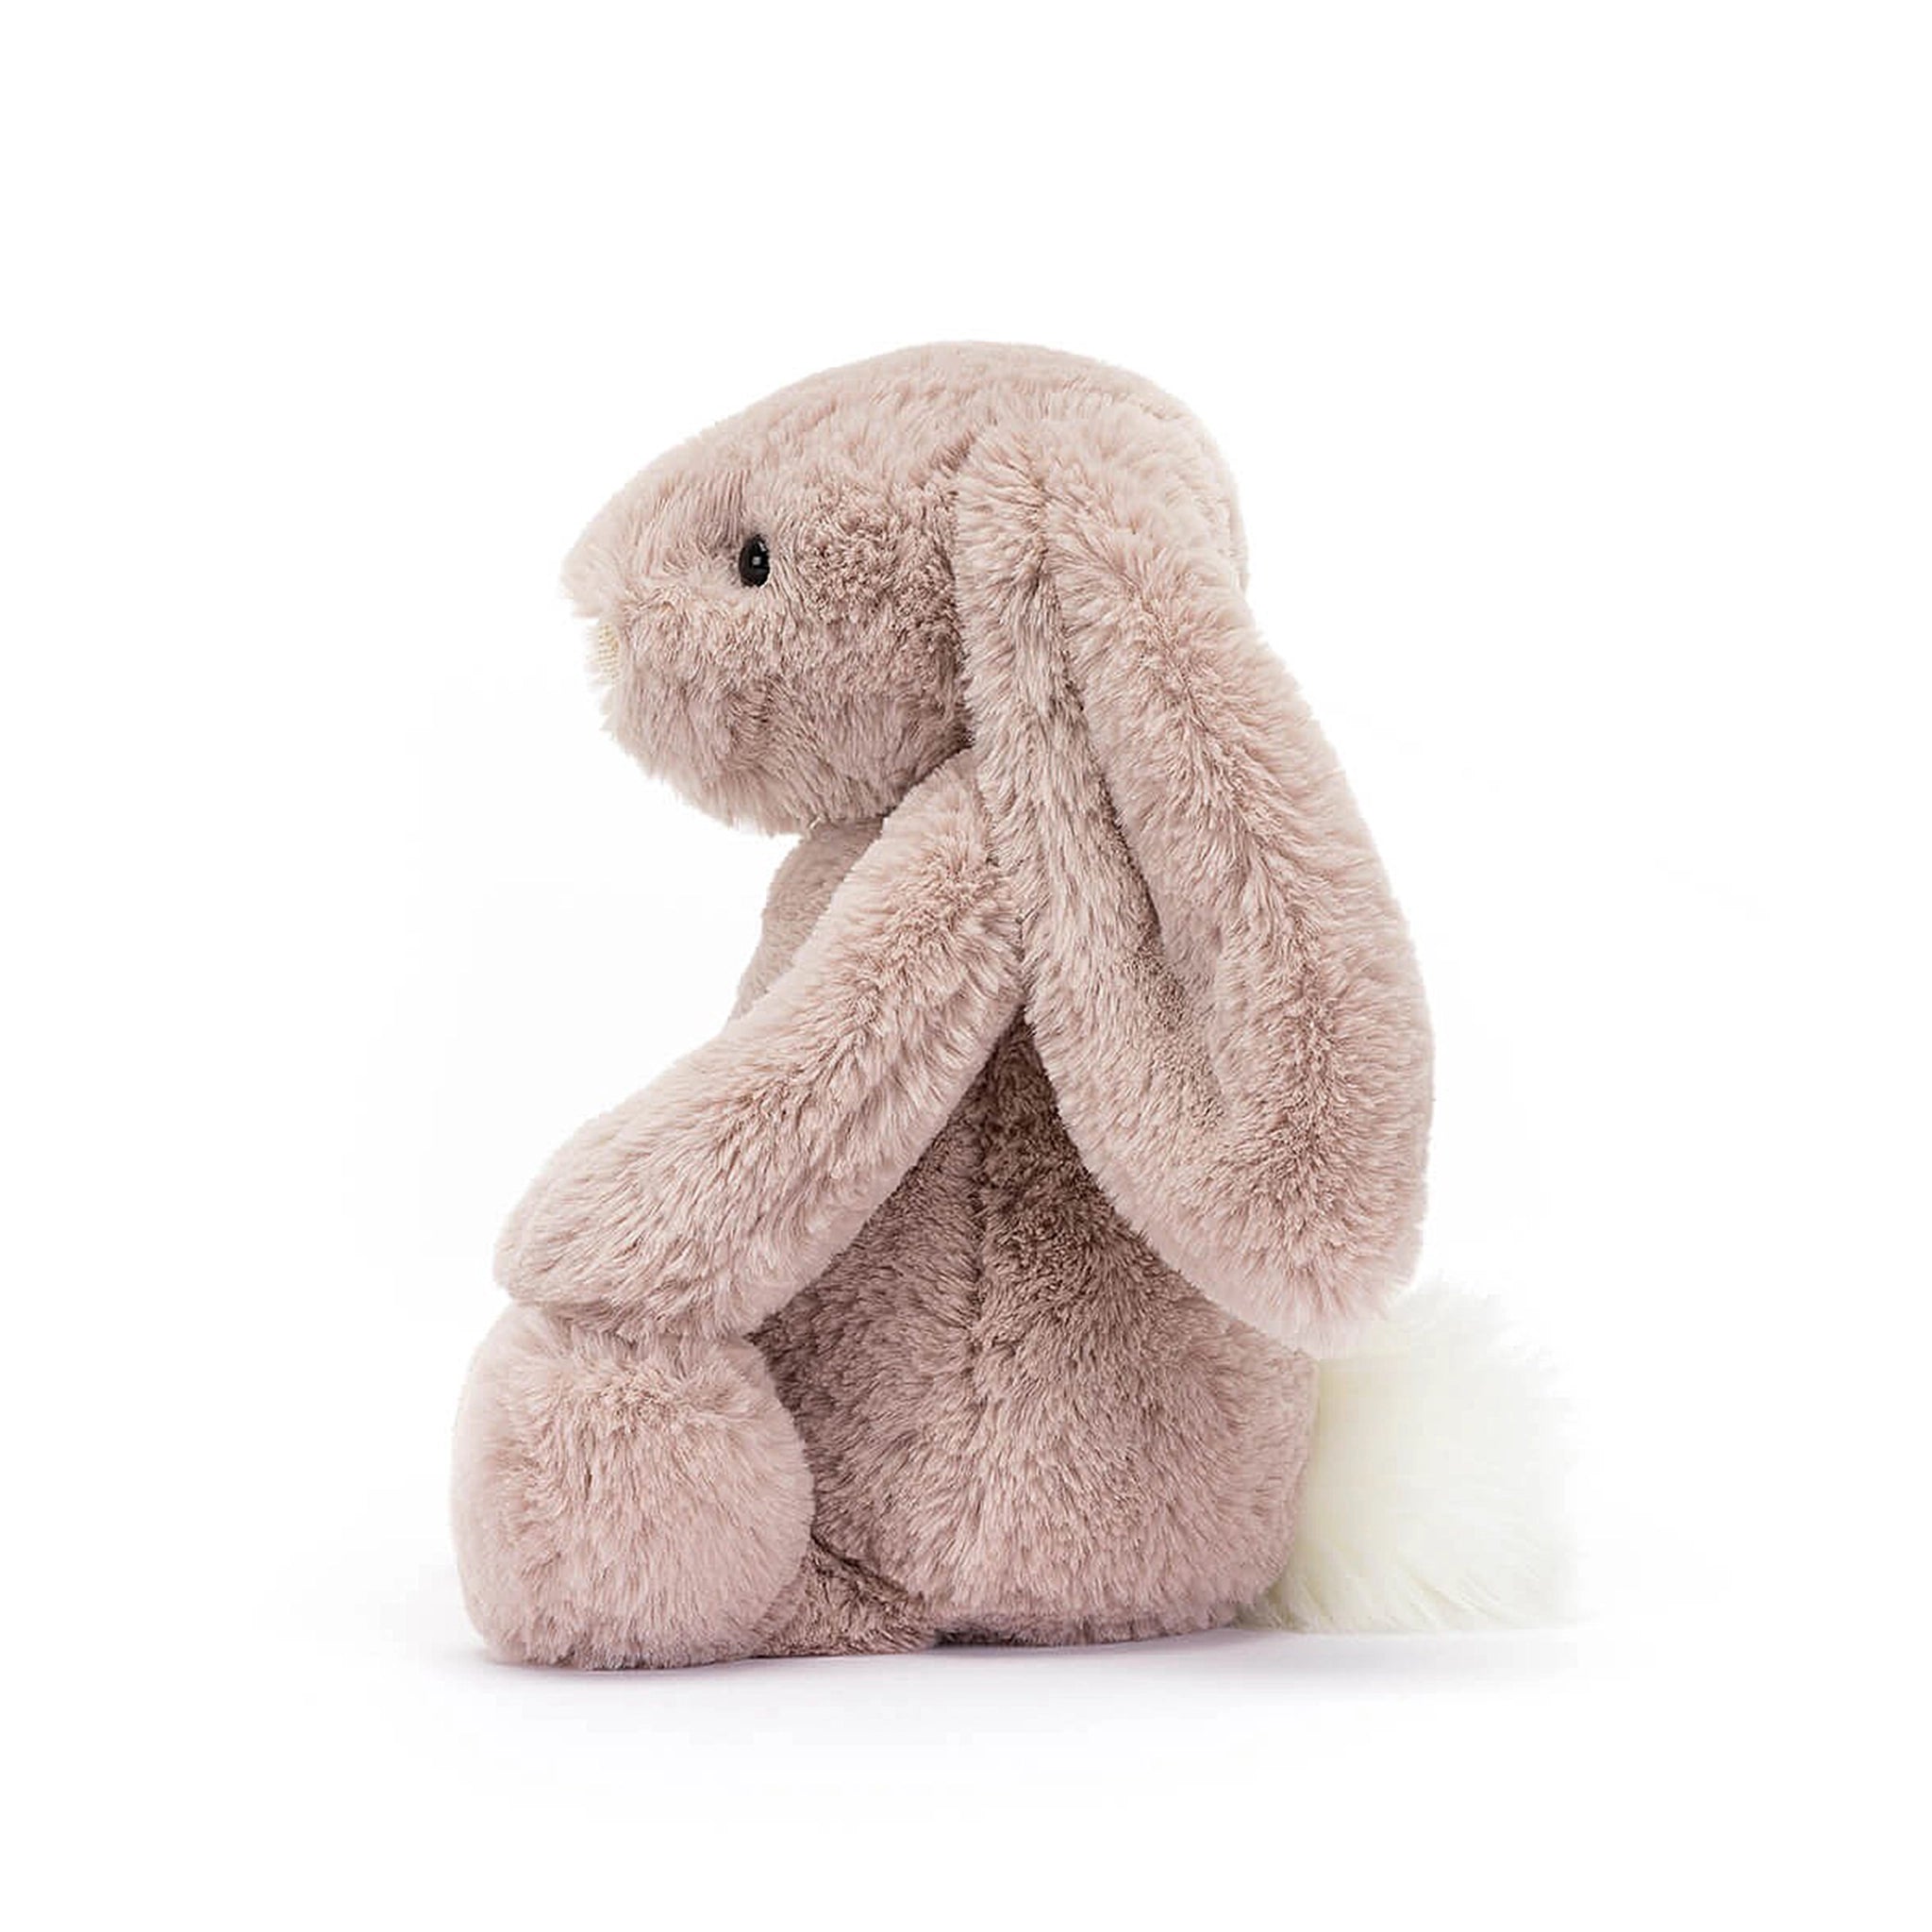 On a white background is a light pink stuffed animal bunny with long floppy ears and super soft faux fur.